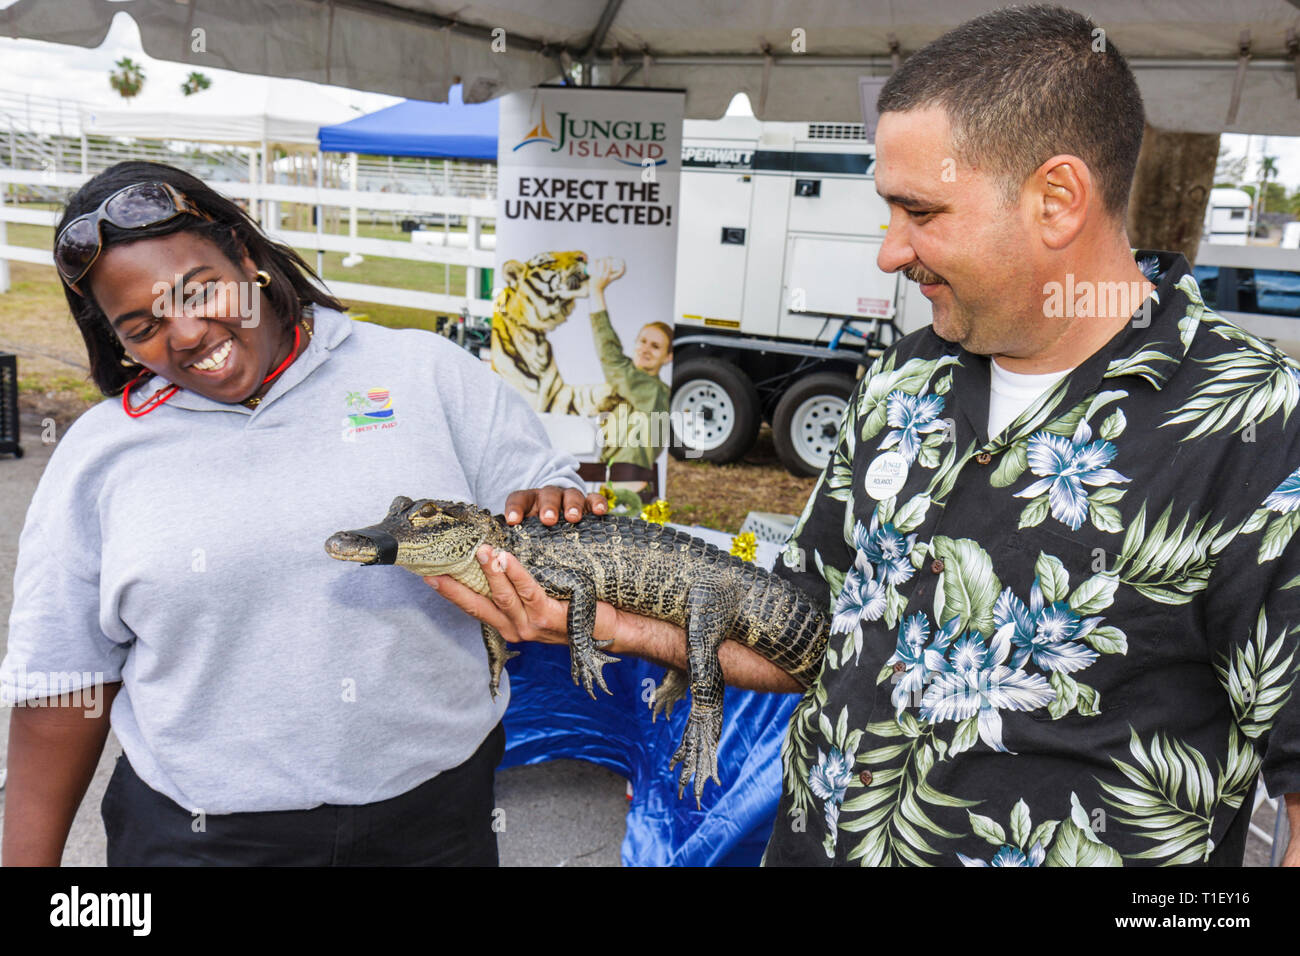 Miami Florida,Kendall,Tropical Park,Miami International Agriculture & Cattle Showtrade,agri business,wildlife,alligator,reptile,Black African Africans Stock Photo